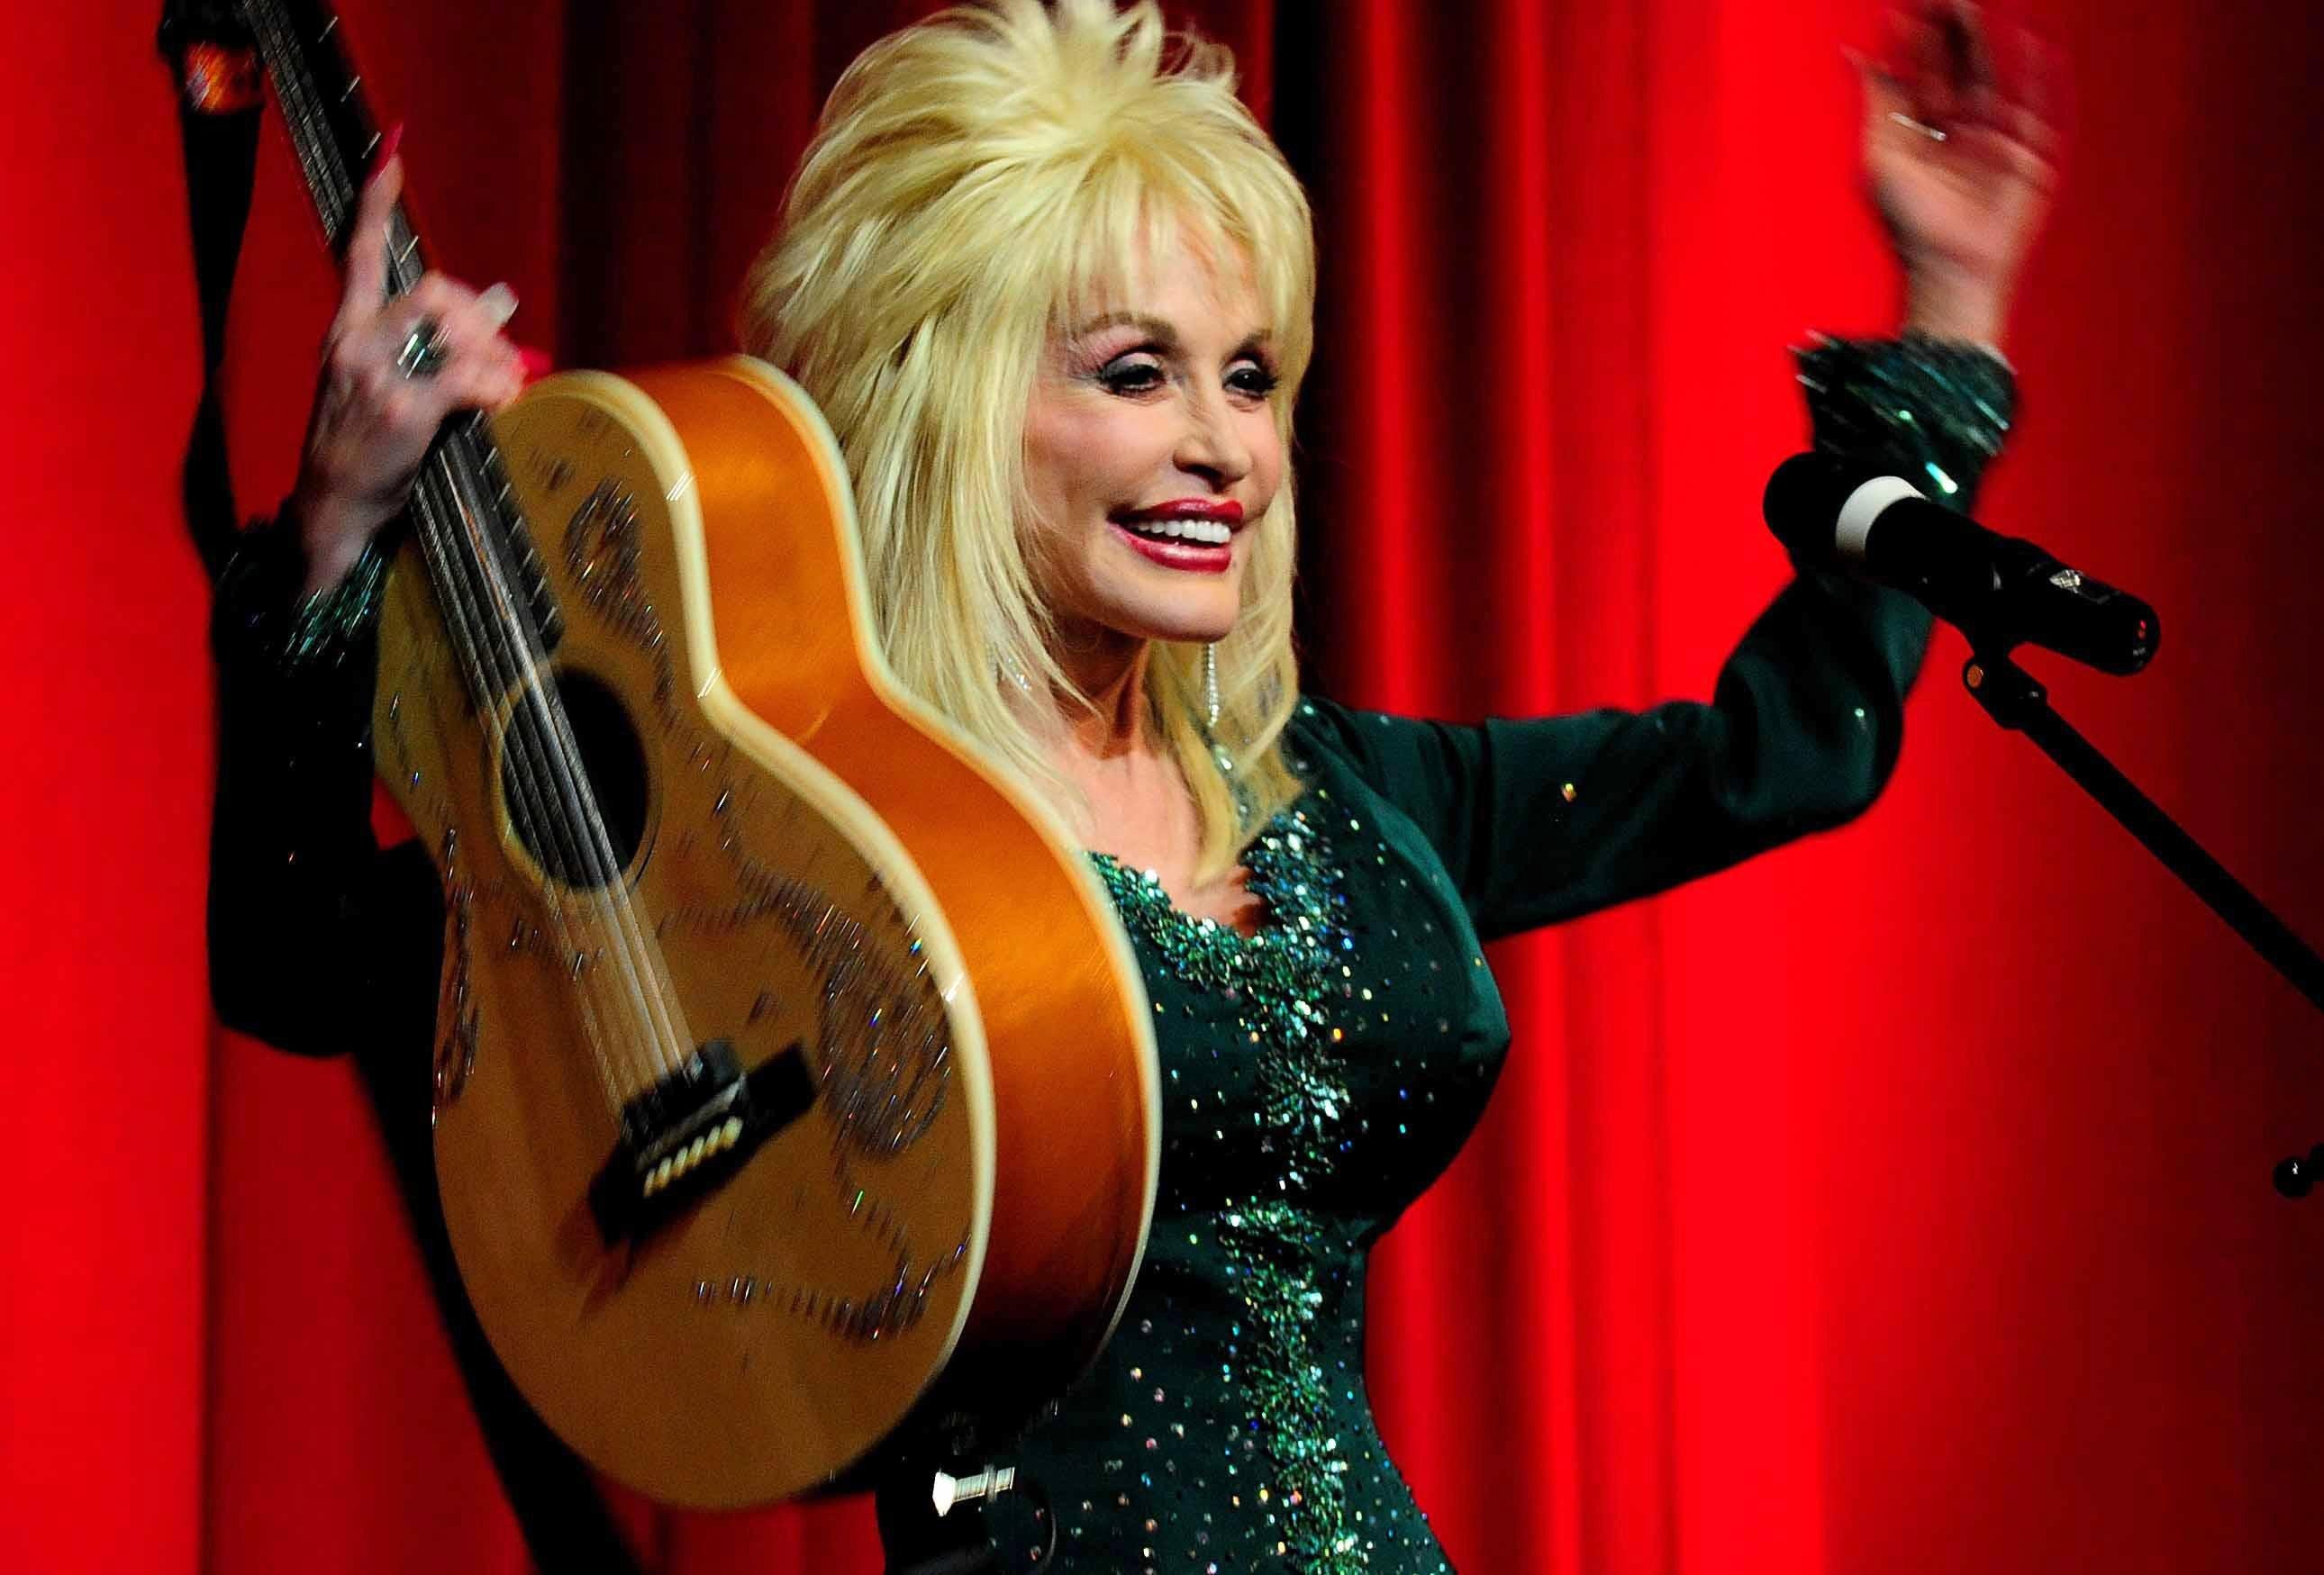 Dolly Parton holds up her hands and guitar in front of a red curtain.